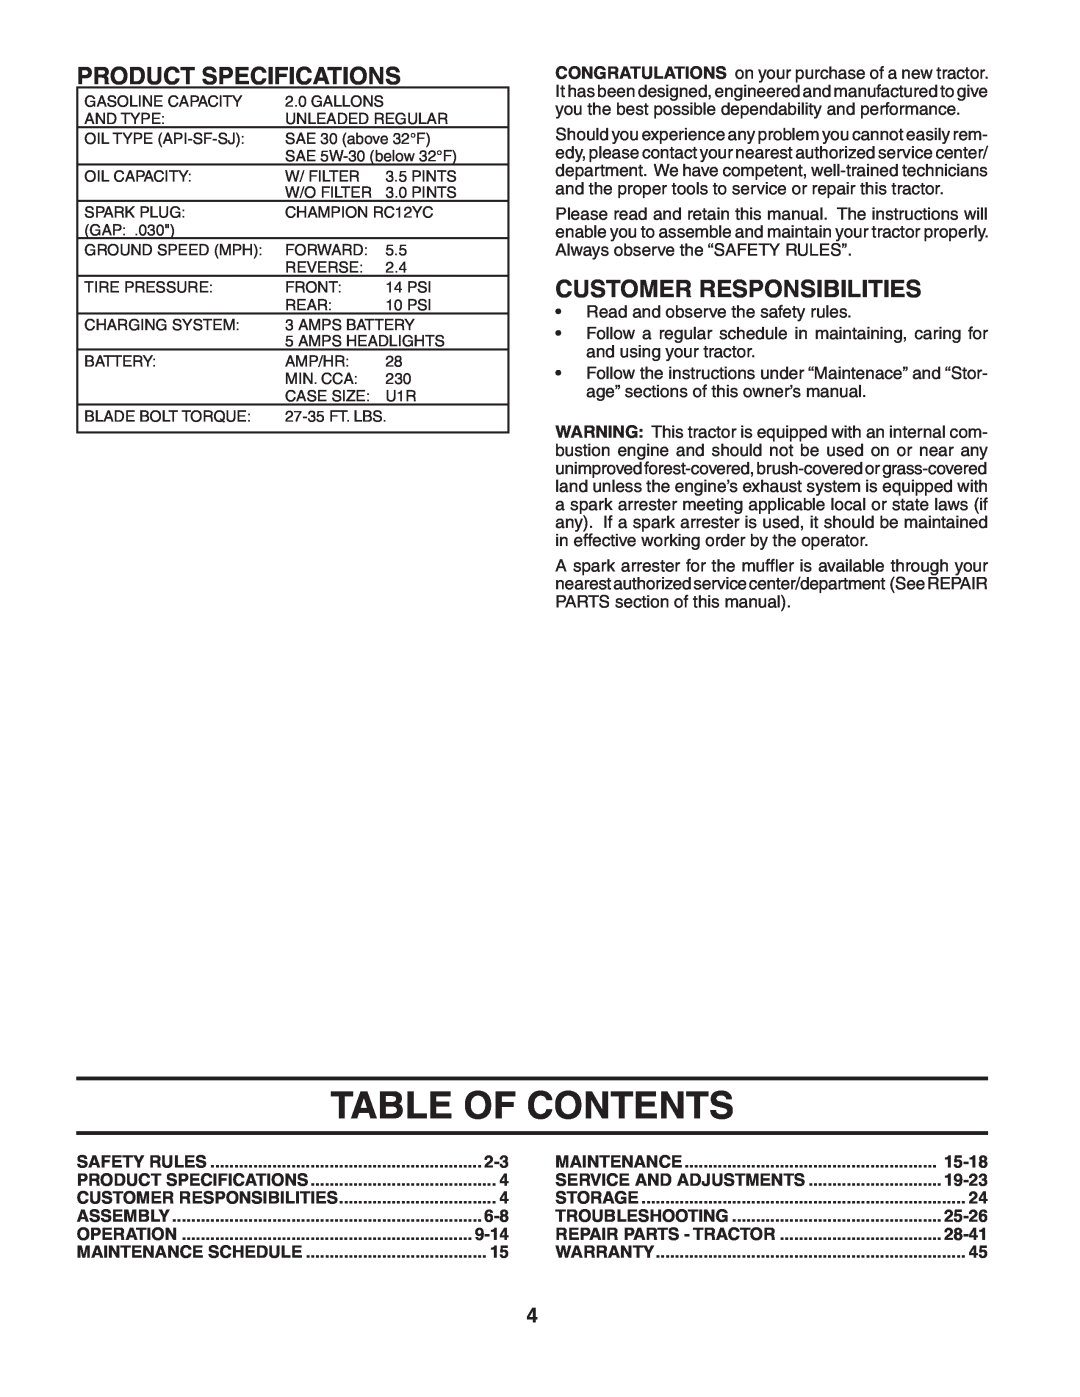 Poulan PD185H42STC Table Of Contents, Product Specifications, Customer Responsibilities, 9-14, 15-18, 19-23, 25-26, 28-41 